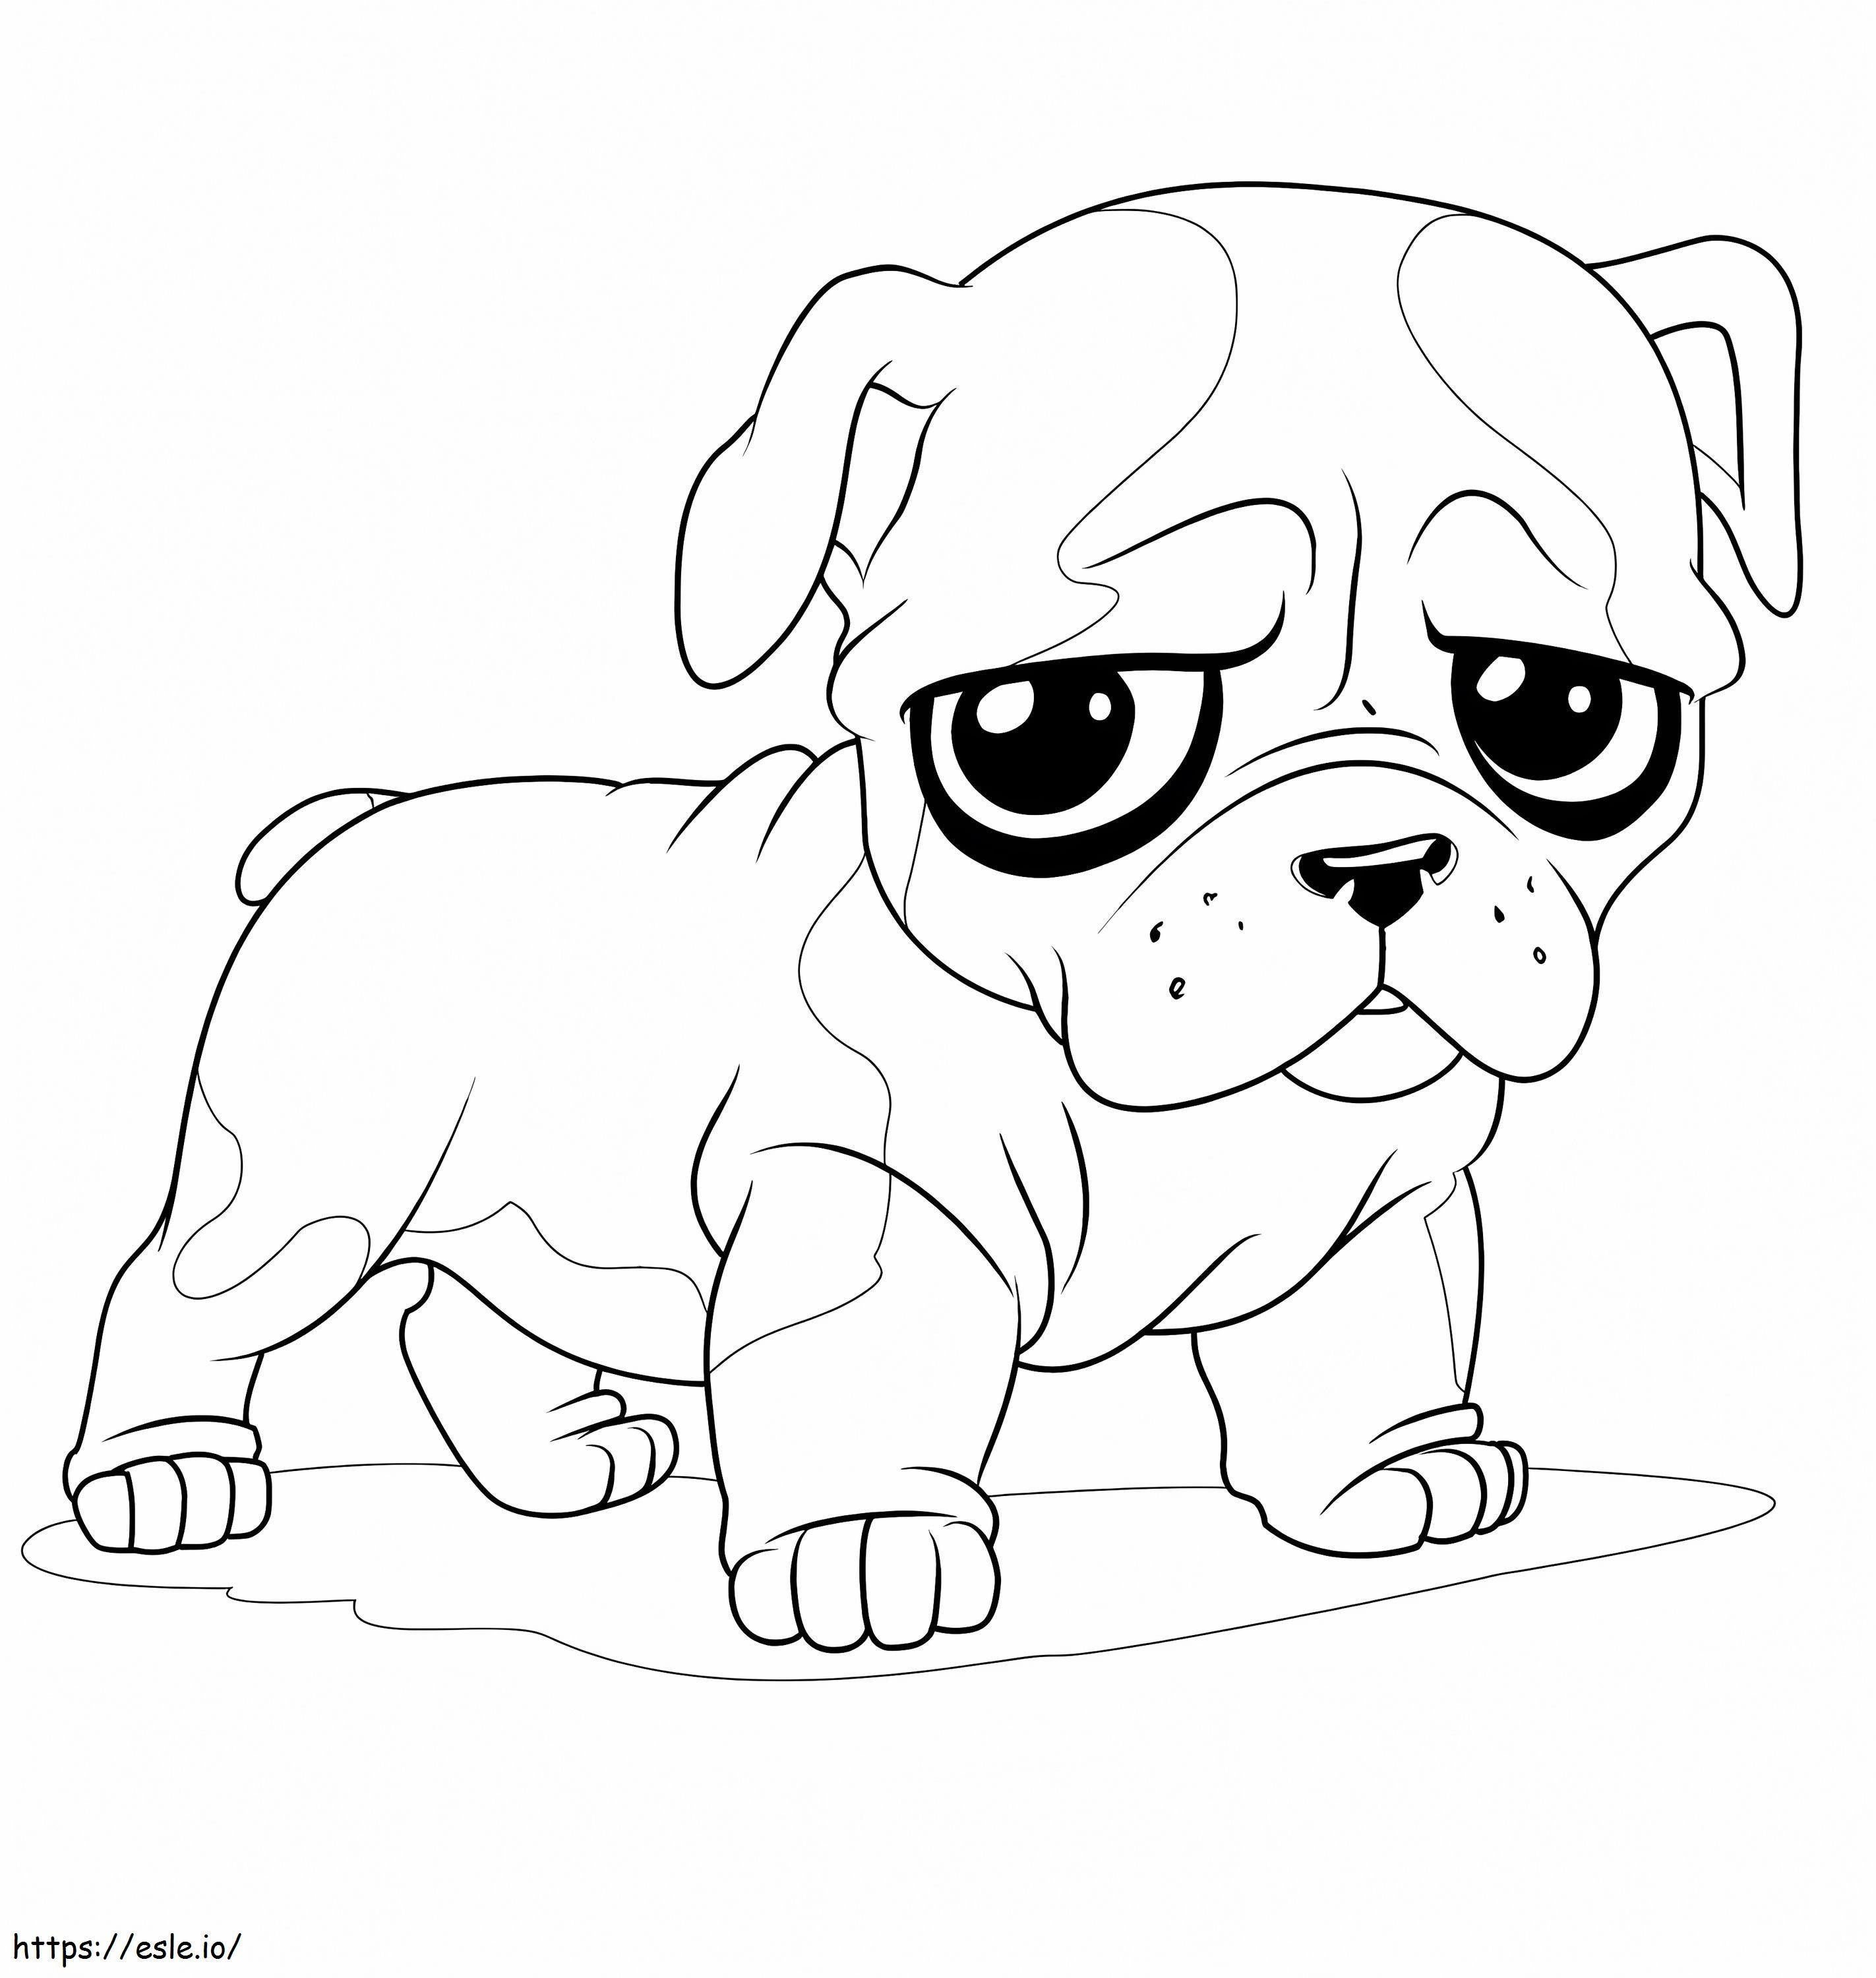 A Funny Puppy coloring page